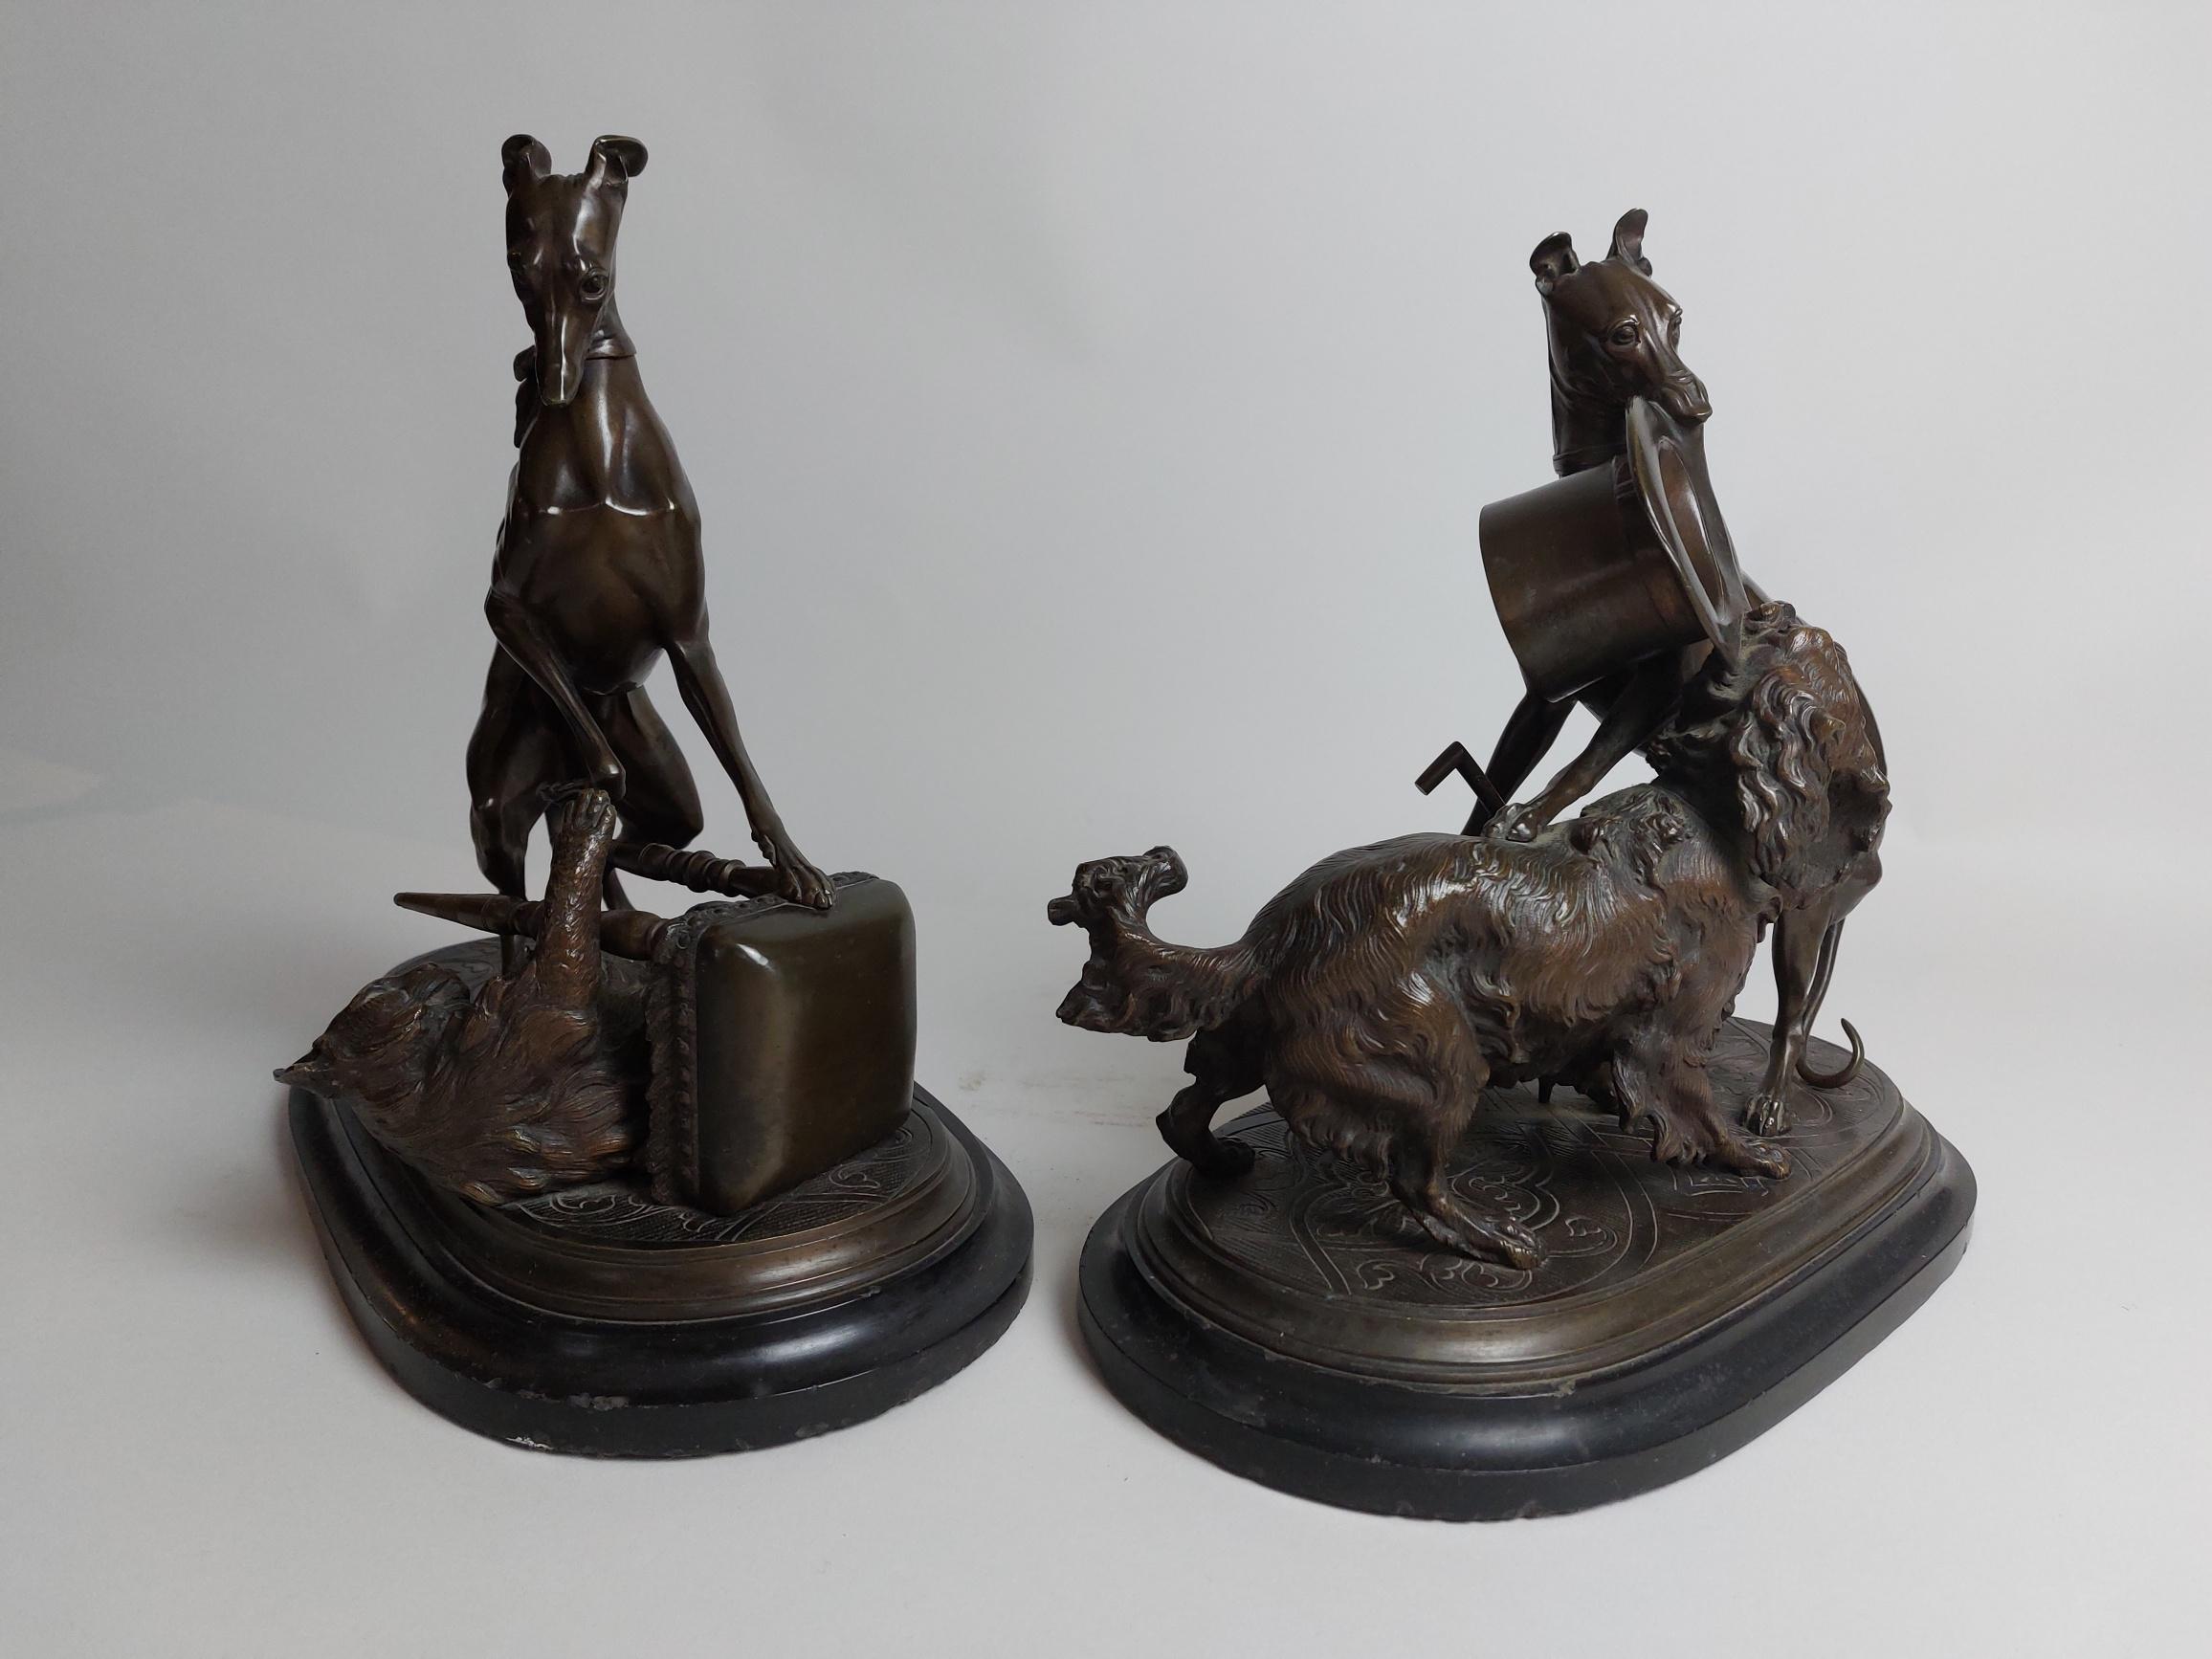 A pair of amusing 19th century bronze dog sculptures of ‘Playful Pets’ by Leblanc Freres.

Two whippets misbehave! One pinning a large maine coon cat under a stool and the other fighting over a hat with a spaniel. 

Leblanc Freres 
Leblanc